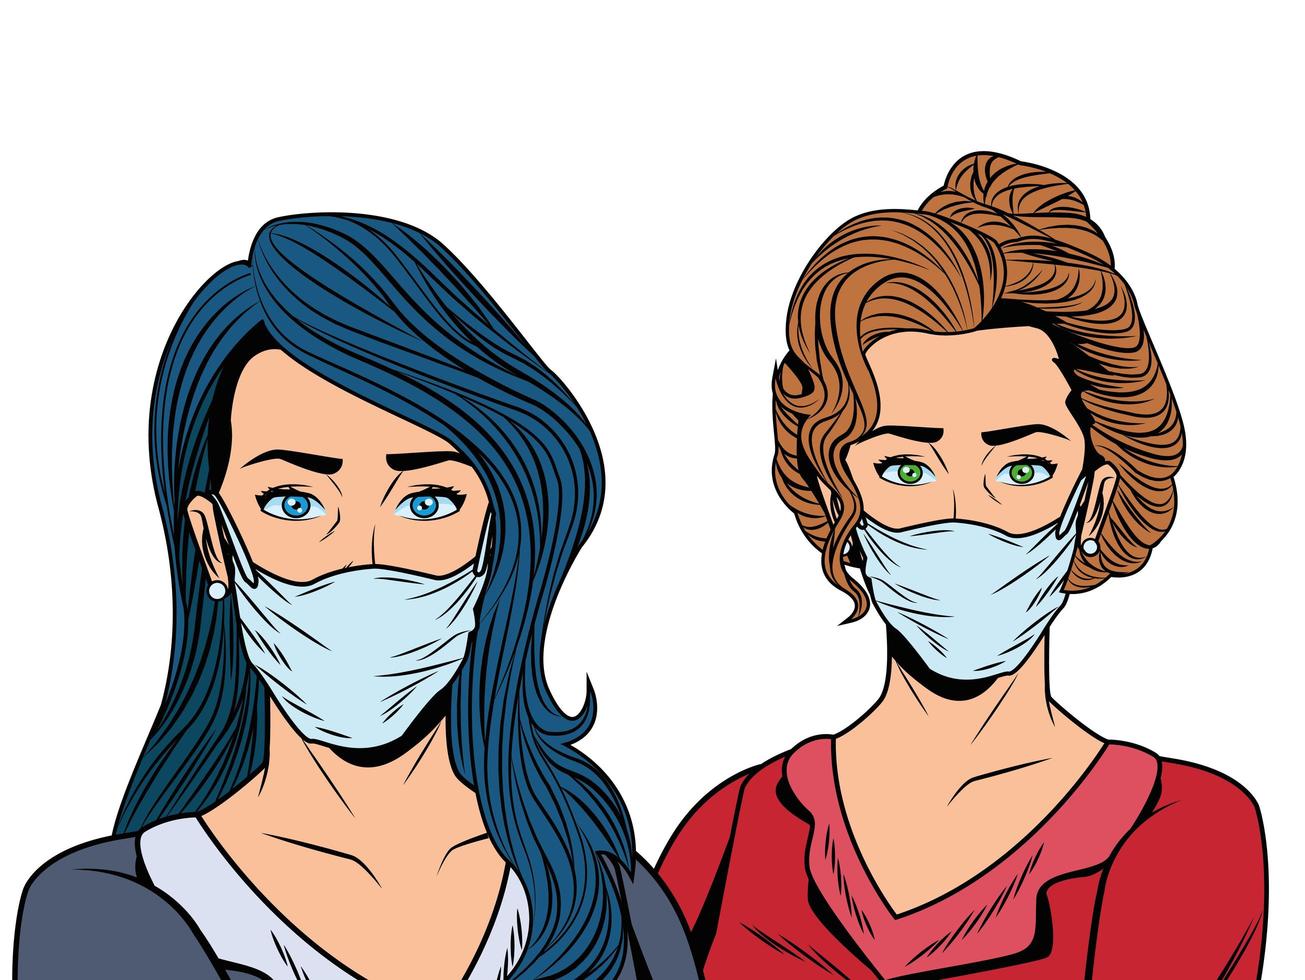 women using face masks for covid19 vector